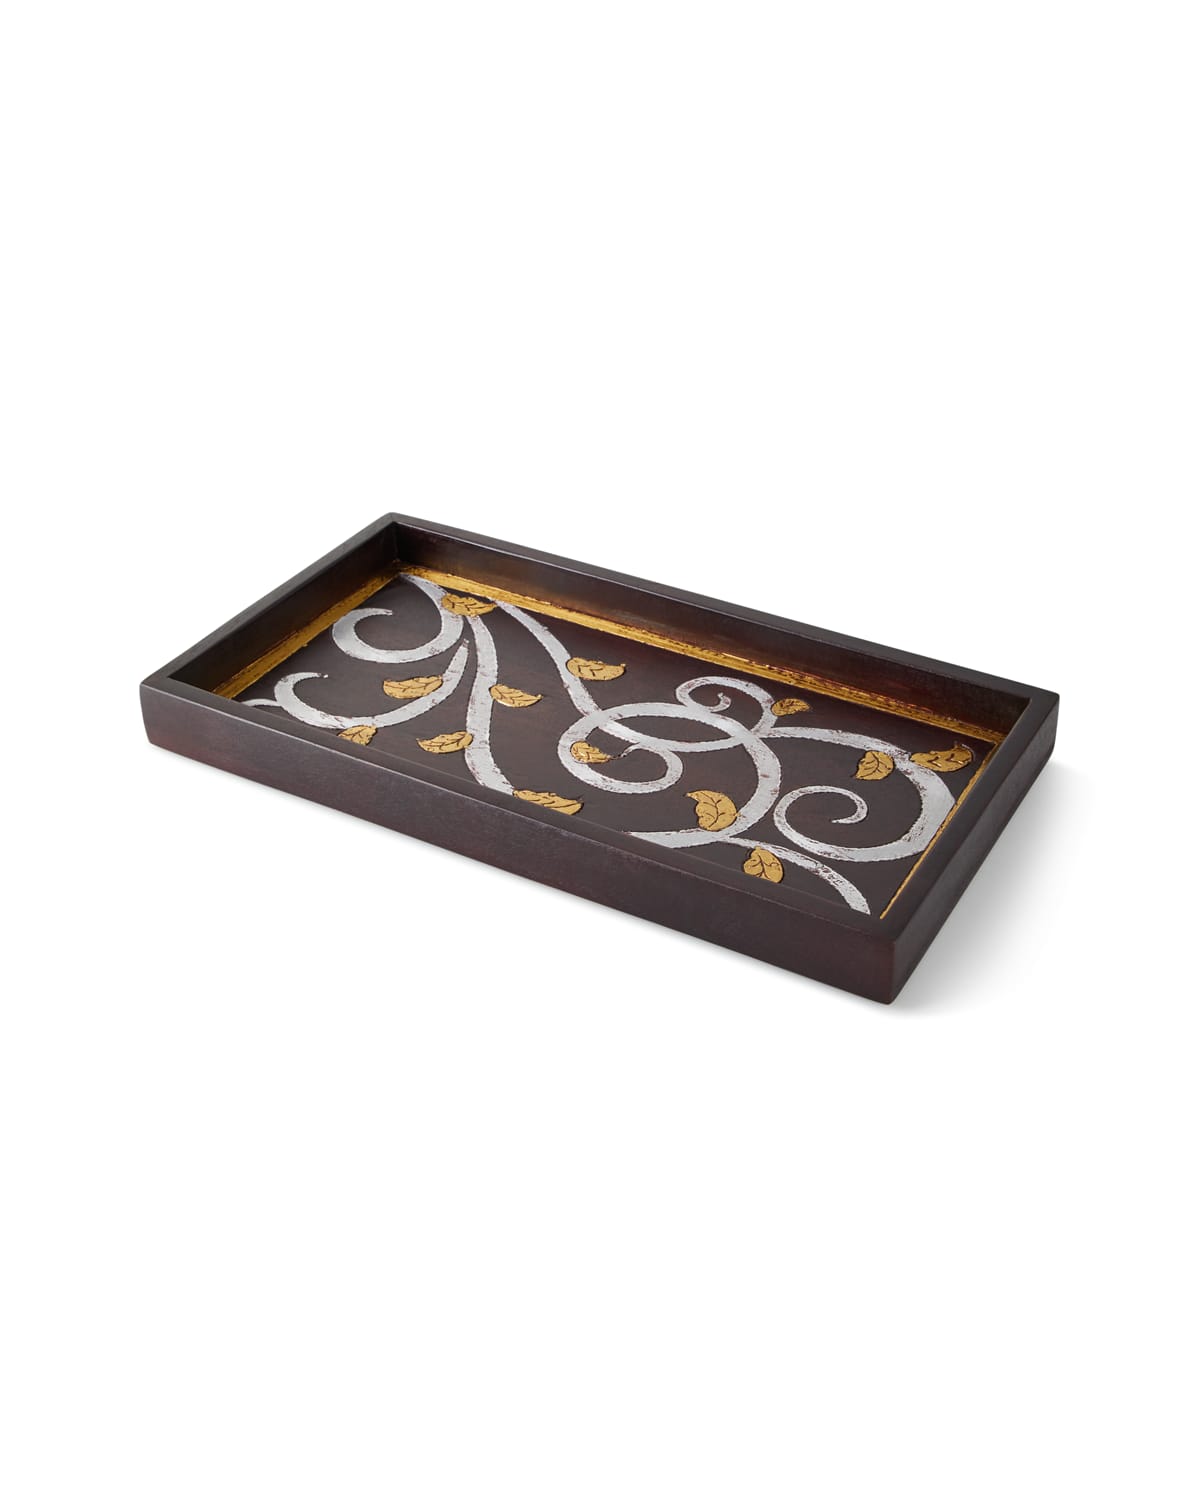 Image G G Collection Gold Leaf Tray